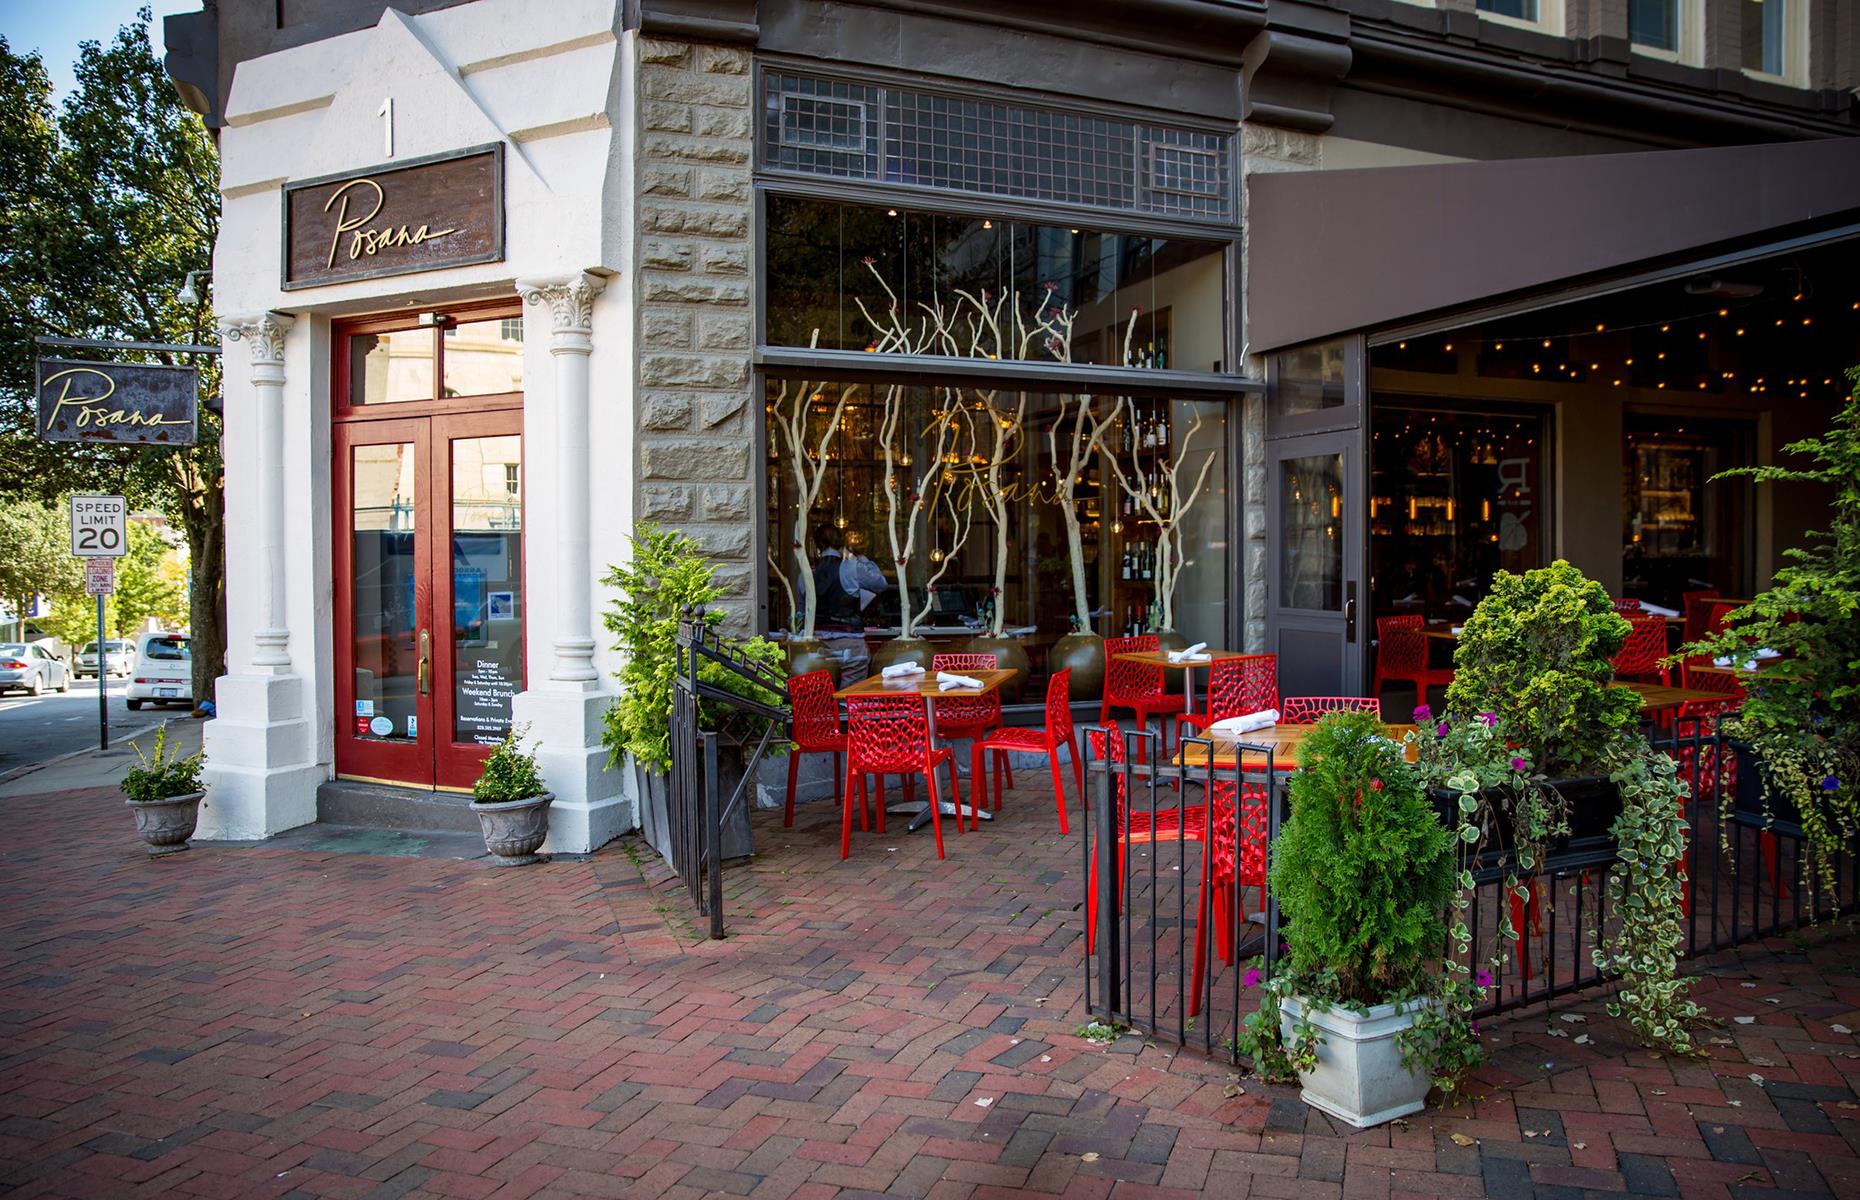 <p>One of quirky Asheville's more refined restaurants, <a href="https://posanarestaurant.com/">Posana's</a> tempting menu is entirely gluten-free. It's all about <a href="https://www.yelp.com/biz/posana-asheville-2">fresh produce and full flavors</a> here, with salt roasted beets, garam masala fish and succulent lamb racks, and in 2017 they launched their dog menu for all their four-legged customers. Dogs can choose meatloaf, biscuits or burgers to snaffle on the patio out front. Humans shouldn't miss the spectacular desserts by pastry chef Renee Hill either. </p>